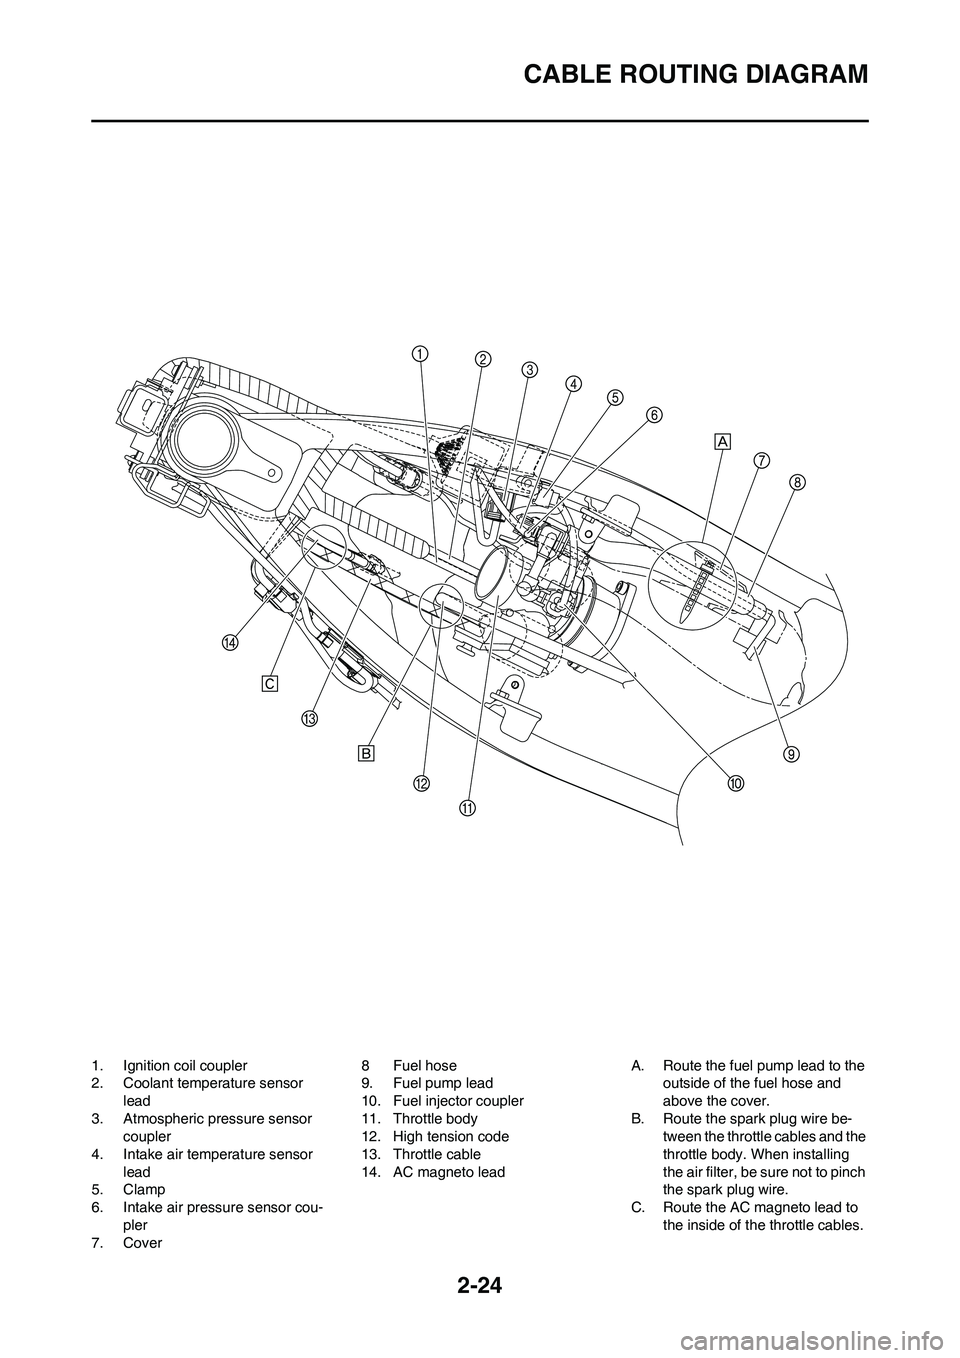 YAMAHA YZ450F 2011  Owners Manual 2-24
CABLE ROUTING DIAGRAM
1. Ignition coil coupler
2. Coolant temperature sensor 
lead
3. Atmospheric pressure sensor 
coupler
4. Intake air temperature sensor 
lead
5. Clamp
6. Intake air pressure s